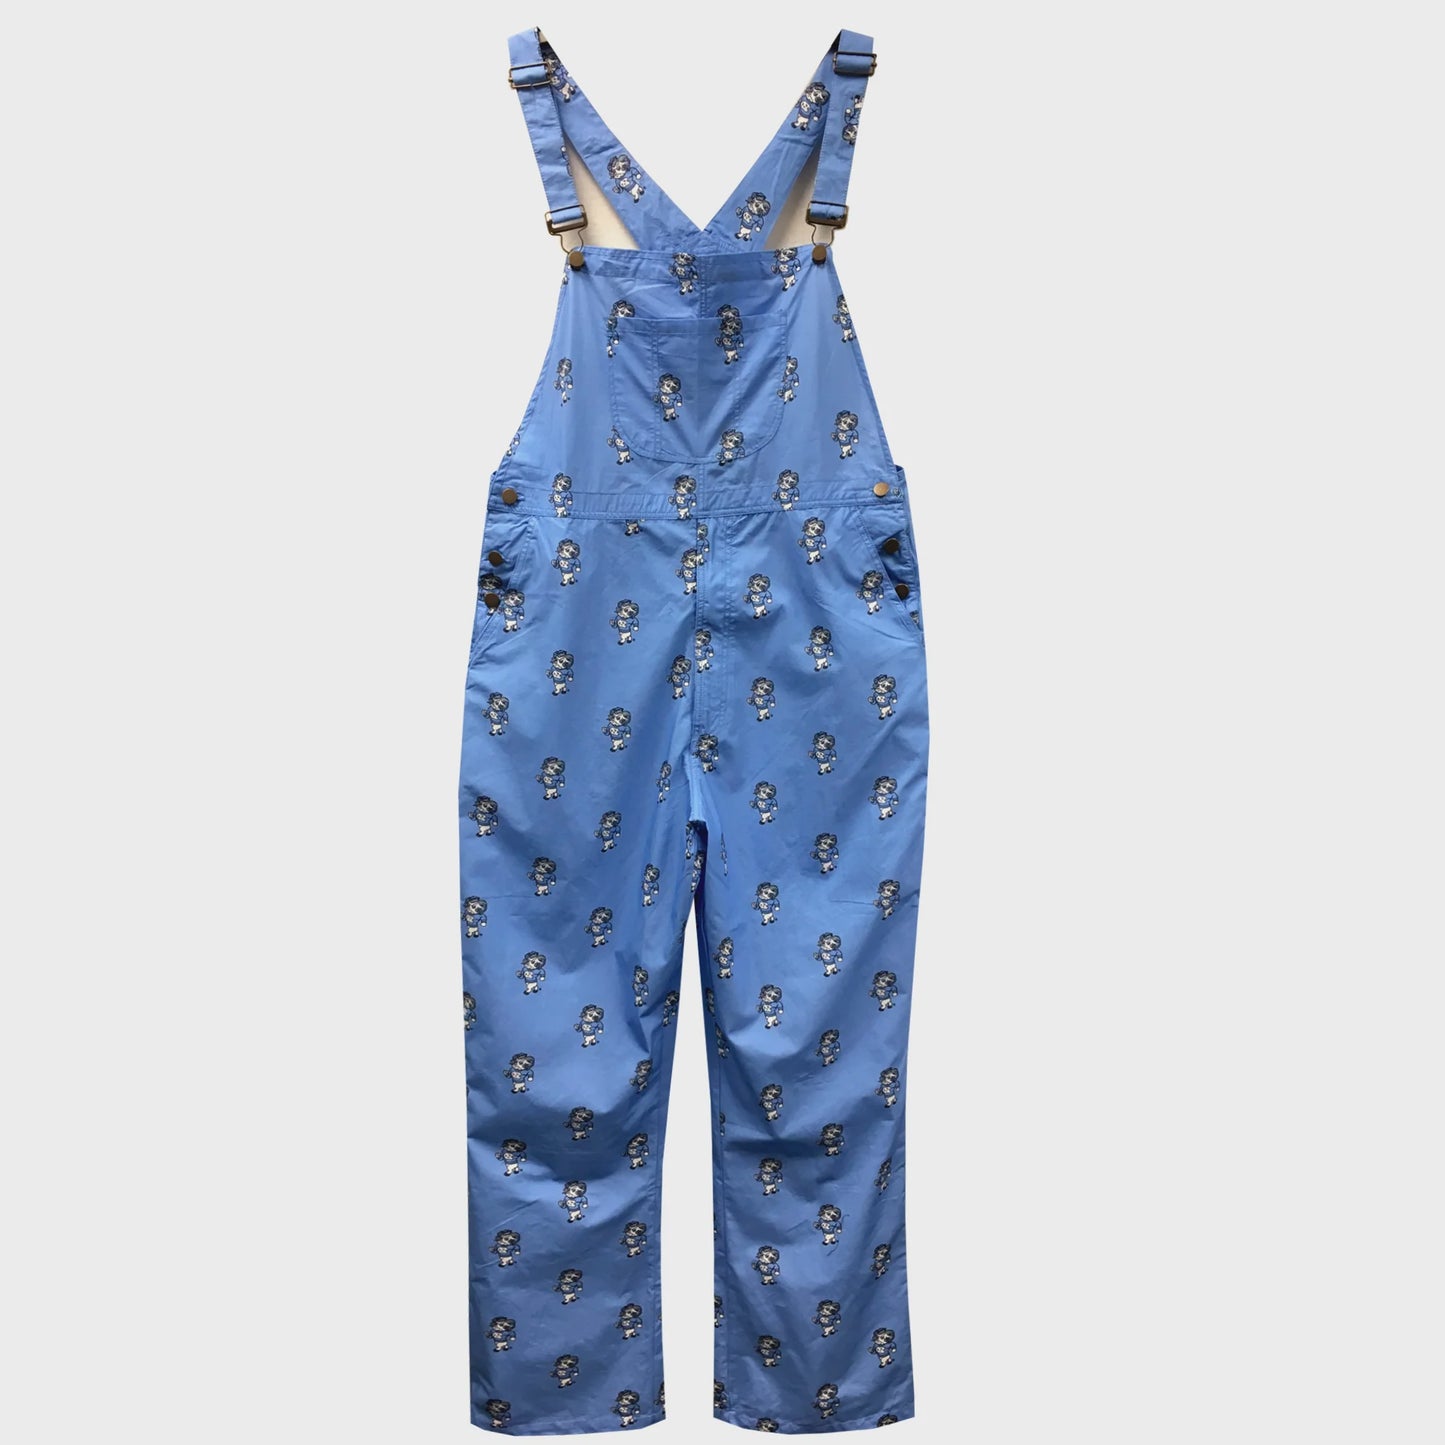 North Carolina Tar Heels Adult Co-ed Allover Logo Overalls by Wes and Willy